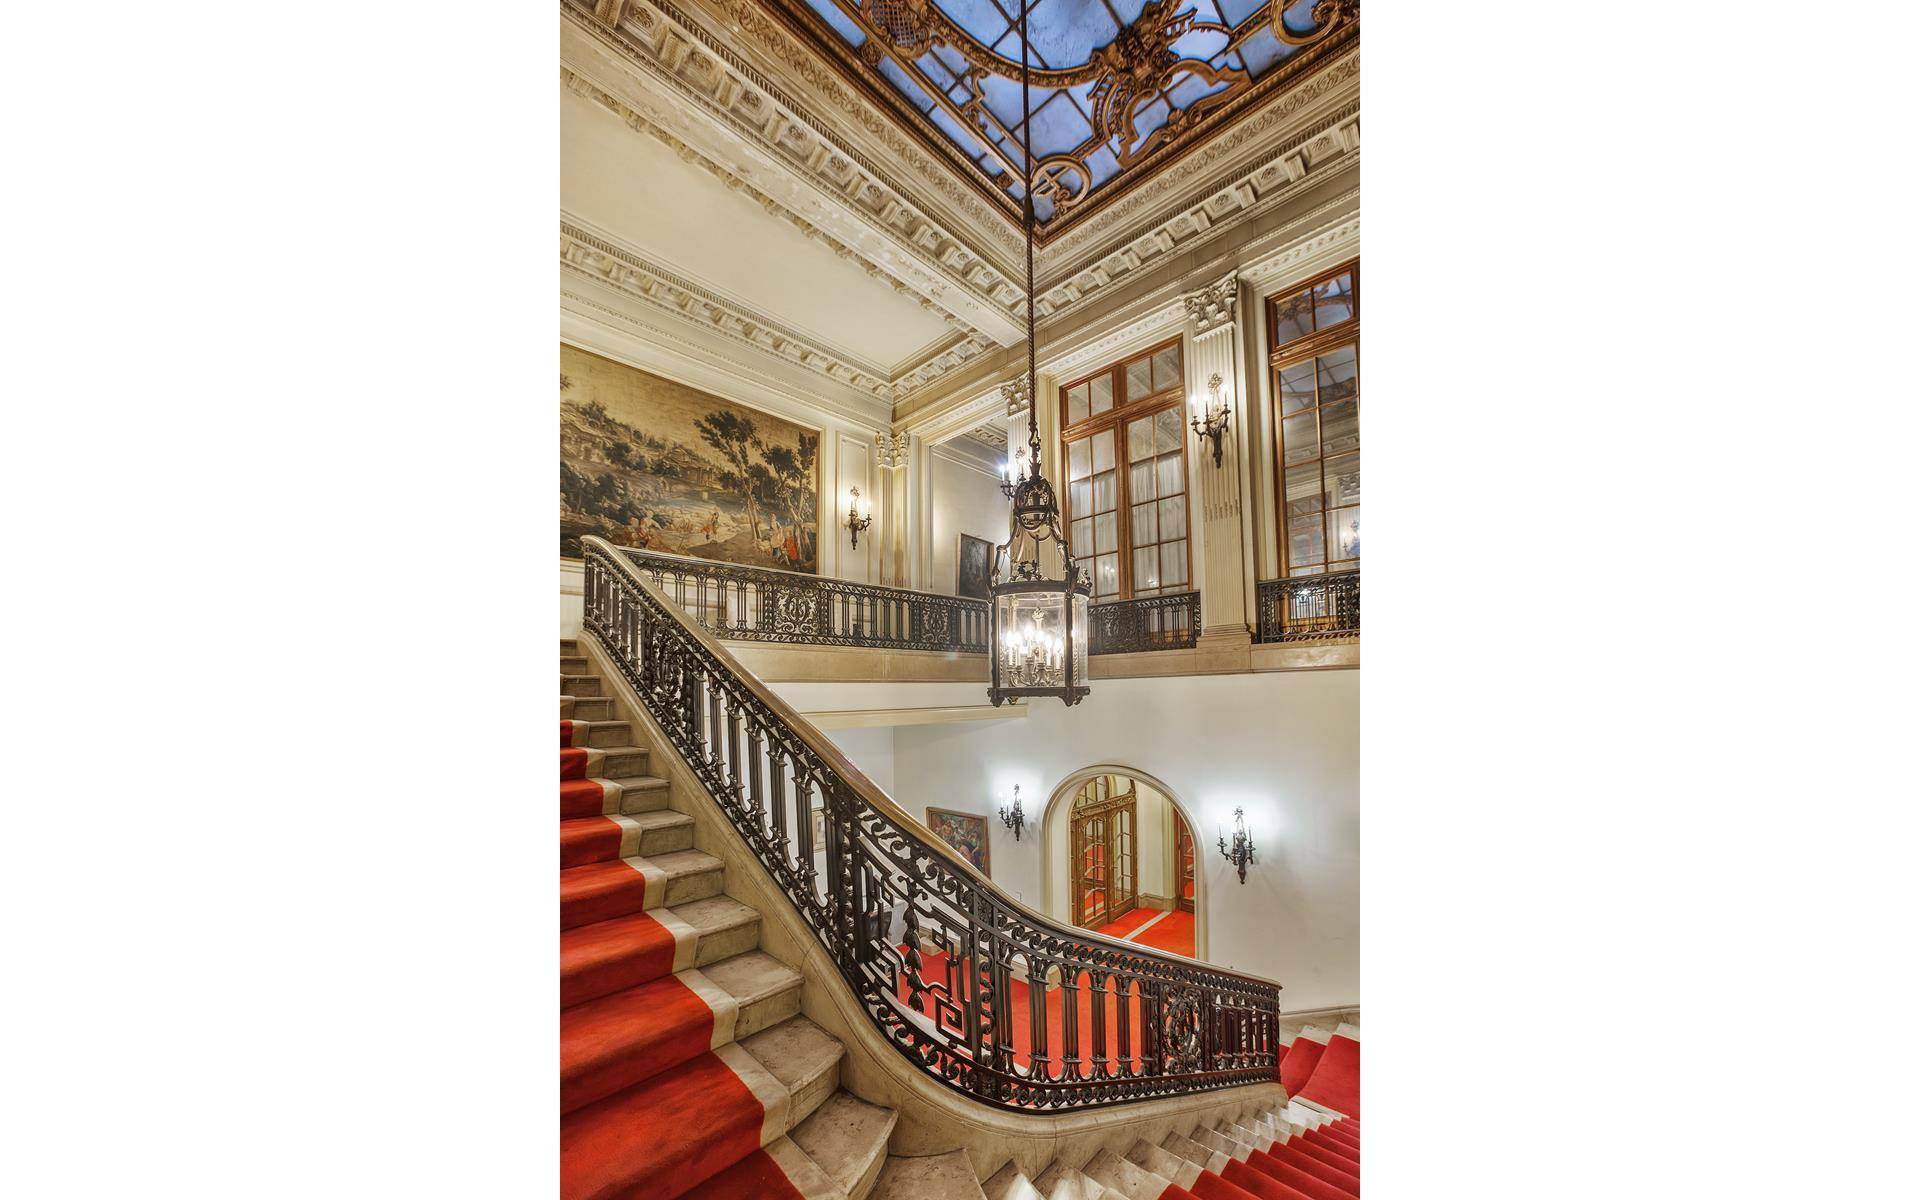 ONE OF A KIND LANDMARKED HISTORIC MANSION OVERLOOKING CENTRAL PARK !